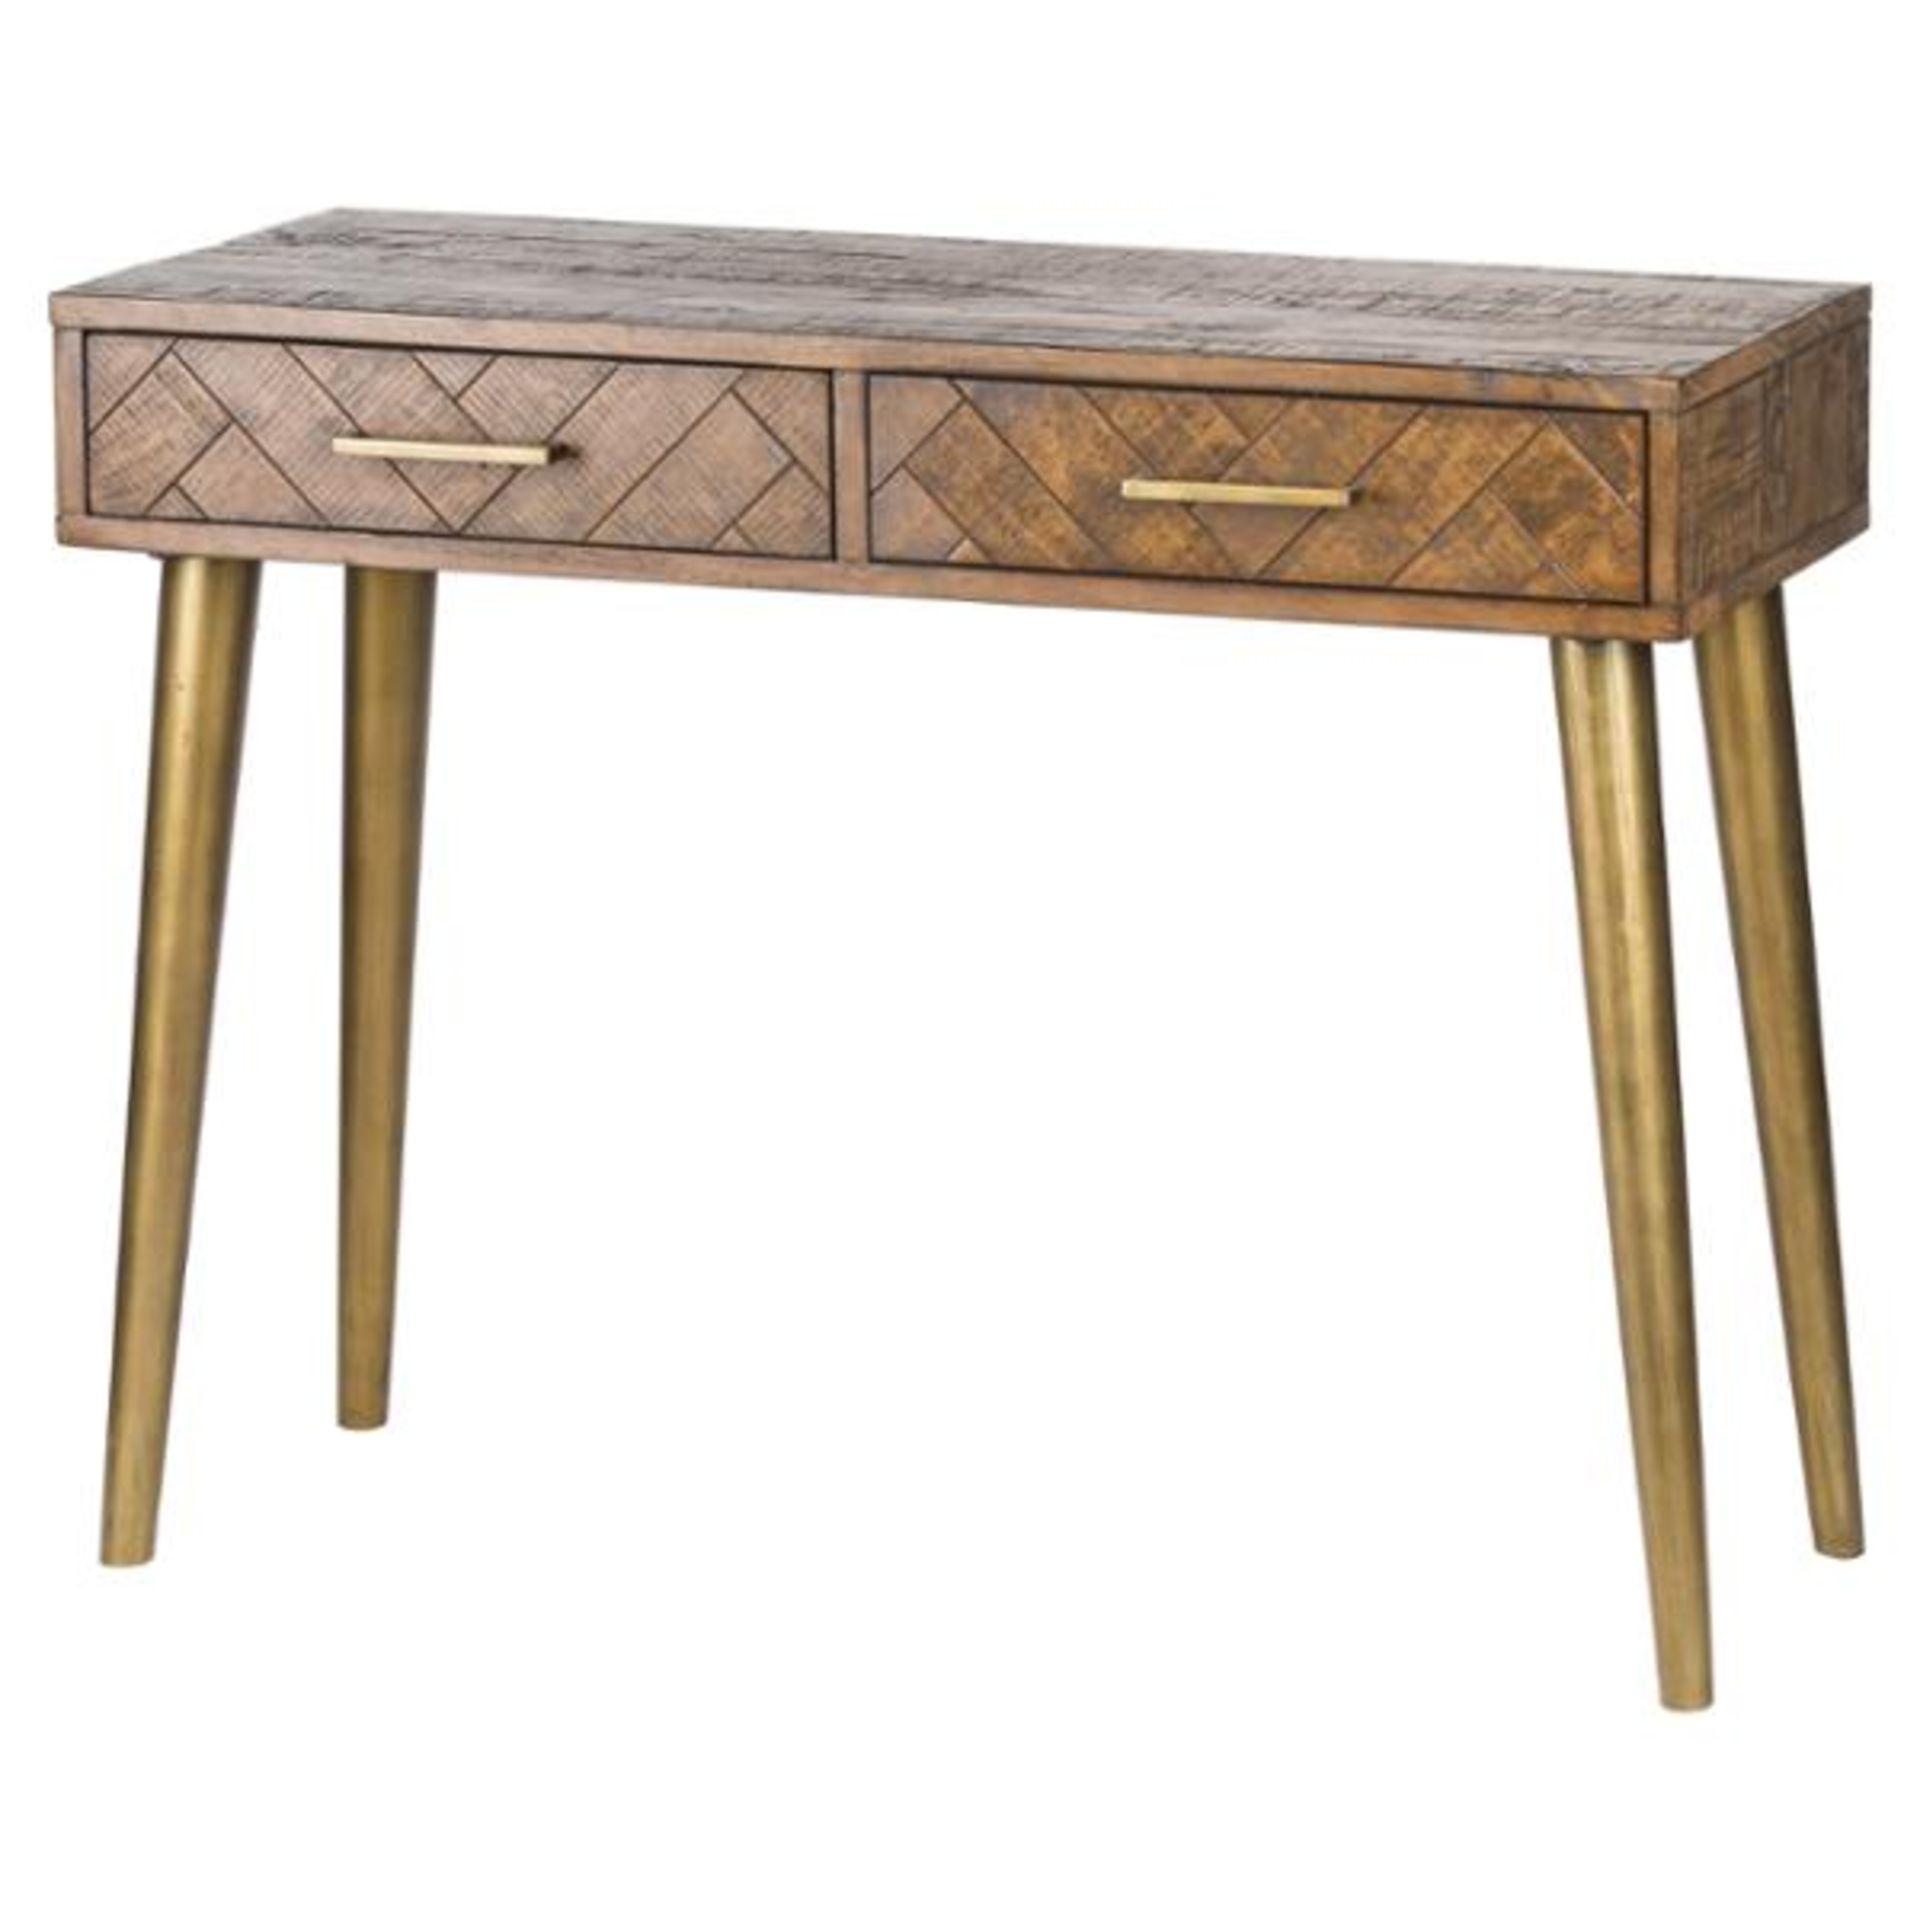 Havana Gold Console Table. Part of a capsule collection pieces designed to deliver a sophisticated